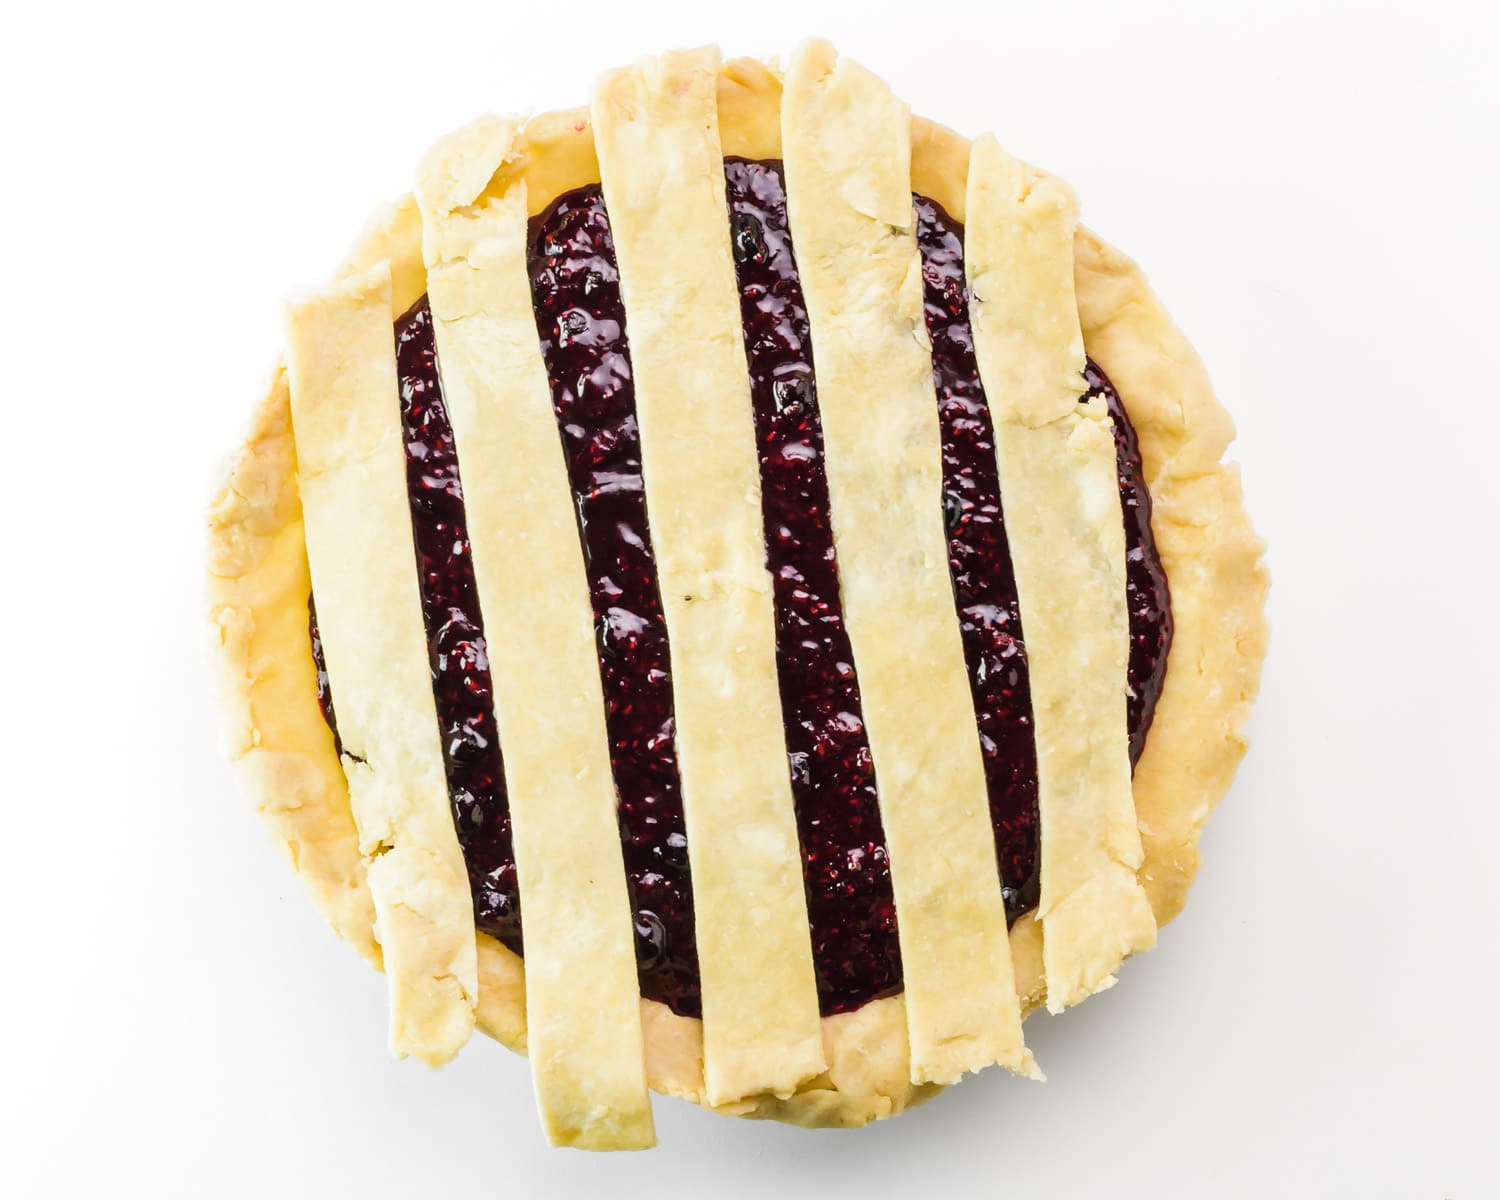 Dough strips are added to the top of the berry pie.